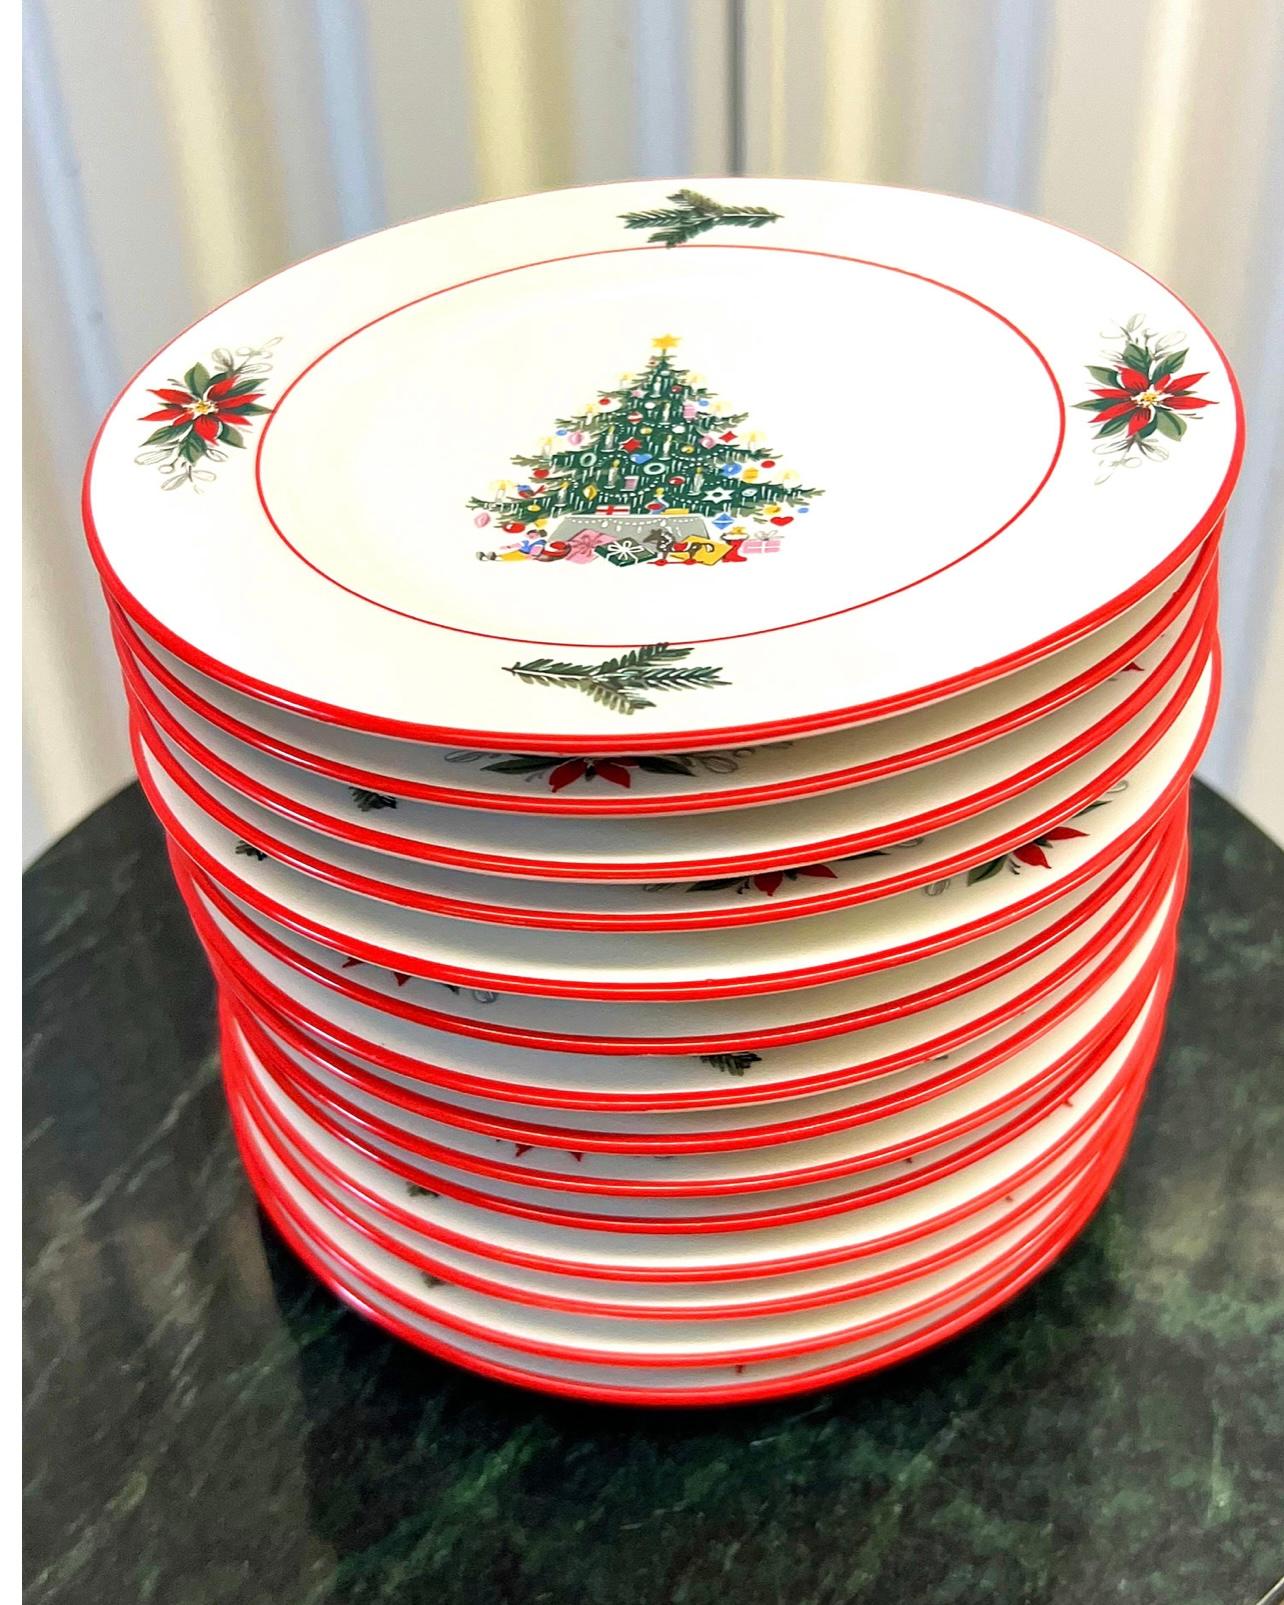 This festive pattern was produced by Schumann from 1970 through 1980 and is now discontinued. It features a Christmas tree center on white with red trim. I’m not one to seek out a lot of holiday specific decor but these were prettier than a lot of